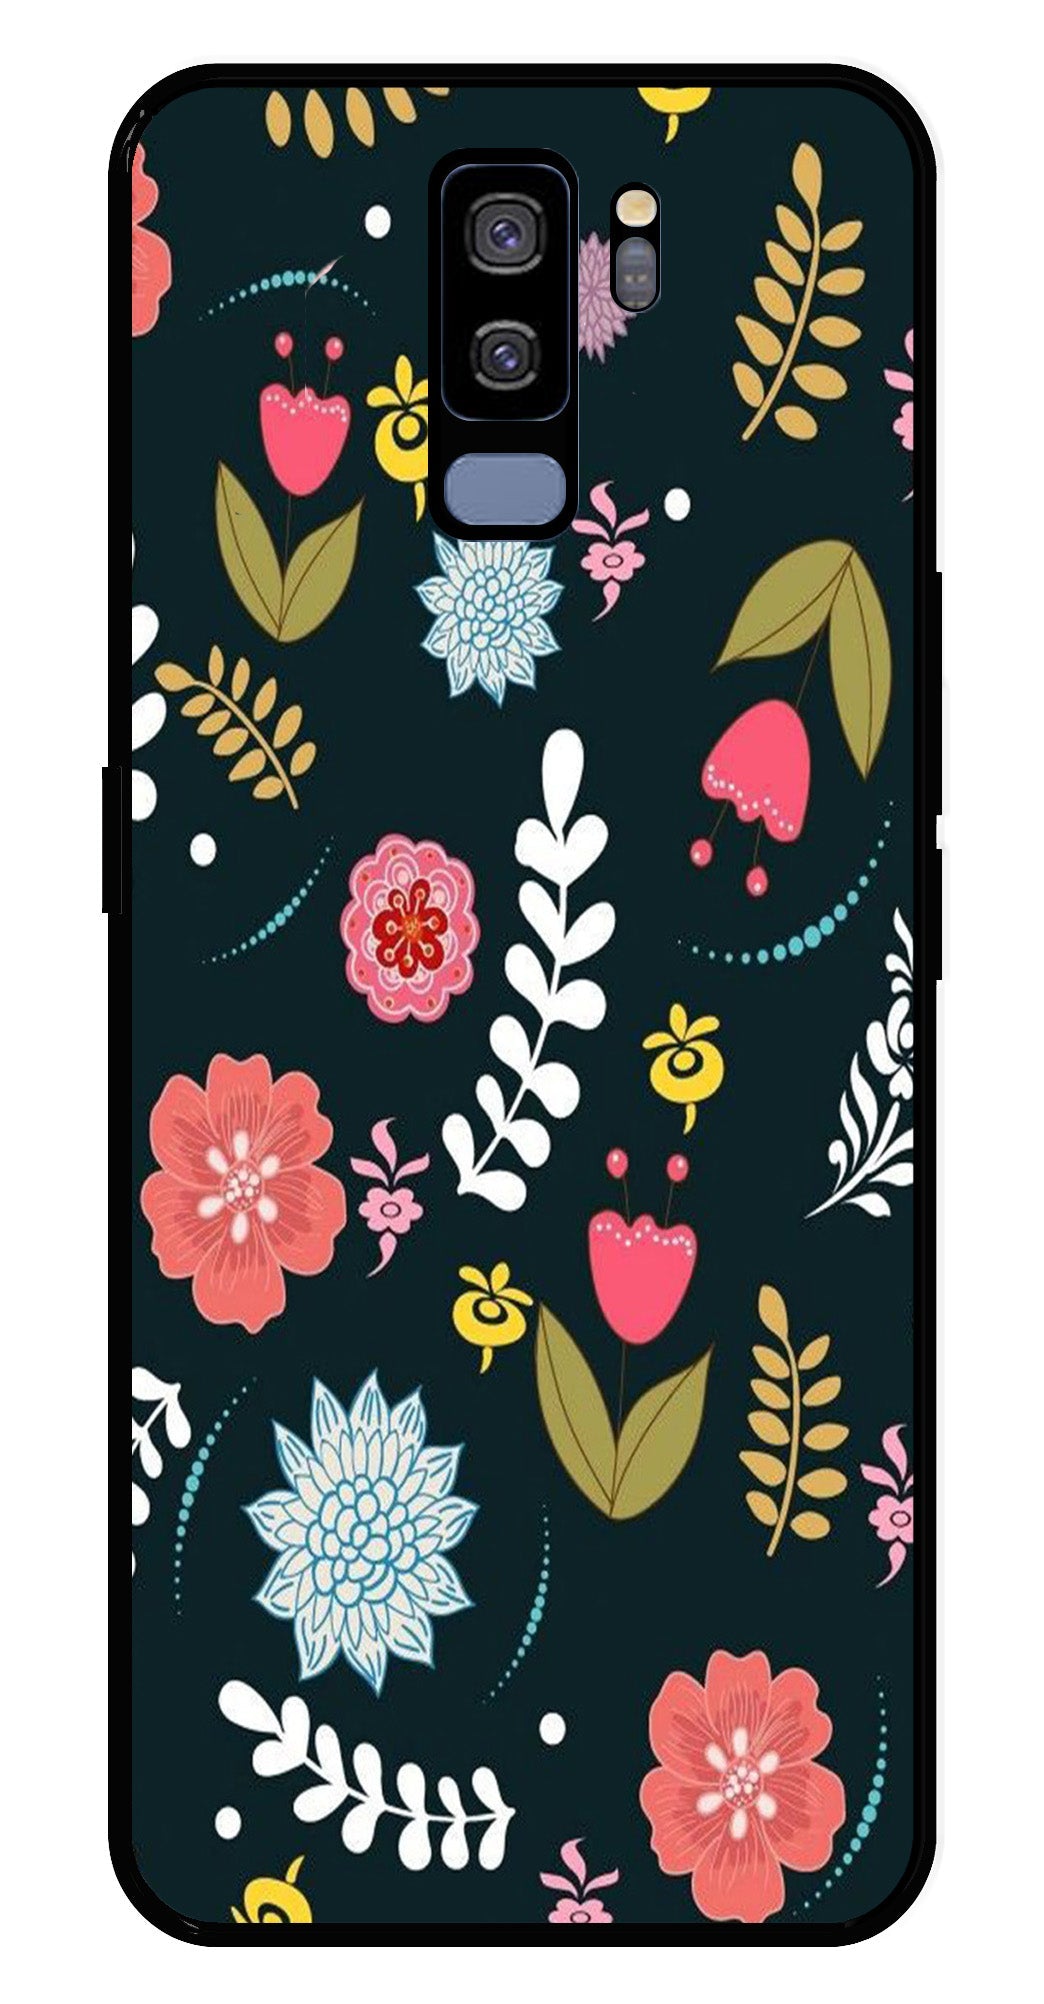 Floral Pattern2 Metal Mobile Case for Samsung Galaxy S9 Plus   (Design No -12)